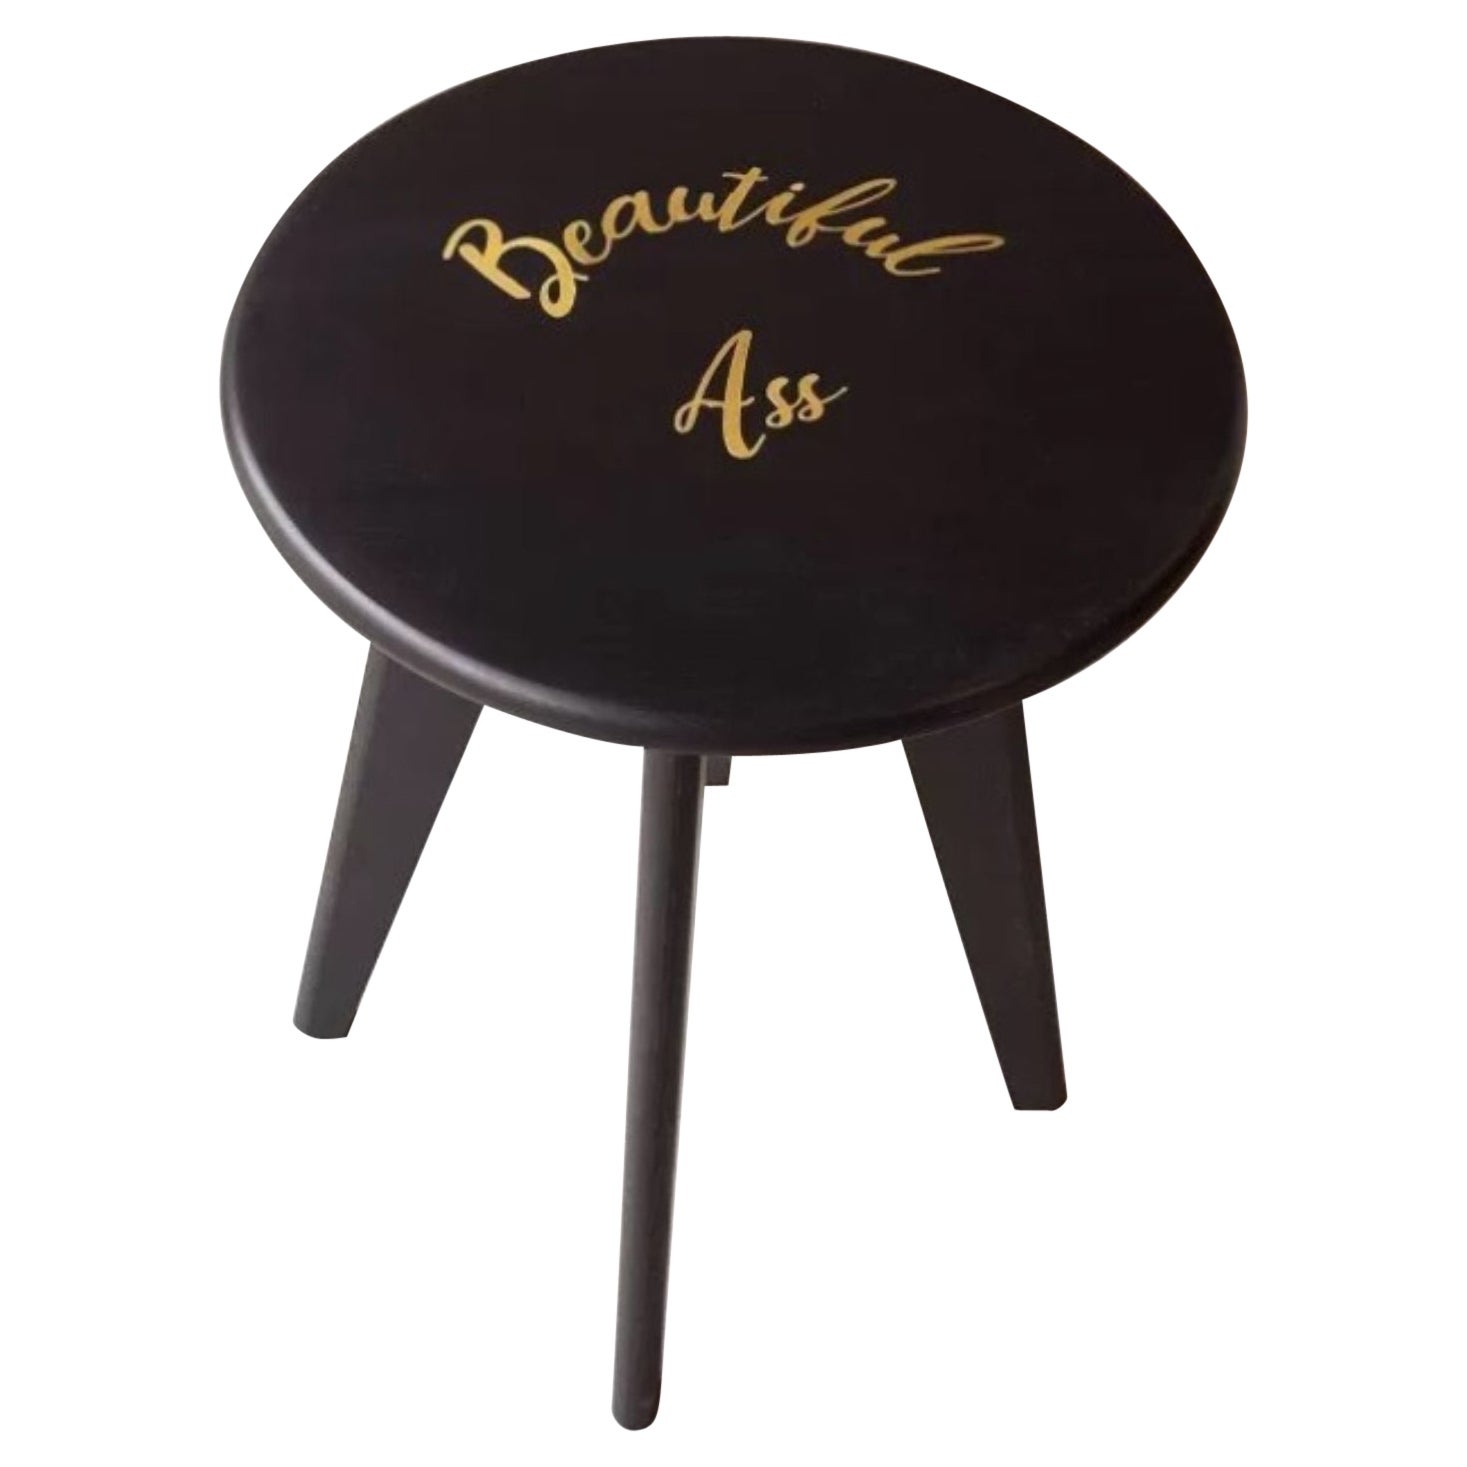 Beautiful Ass Black Stained Ash ASSY Stool by Mademoiselle Jo